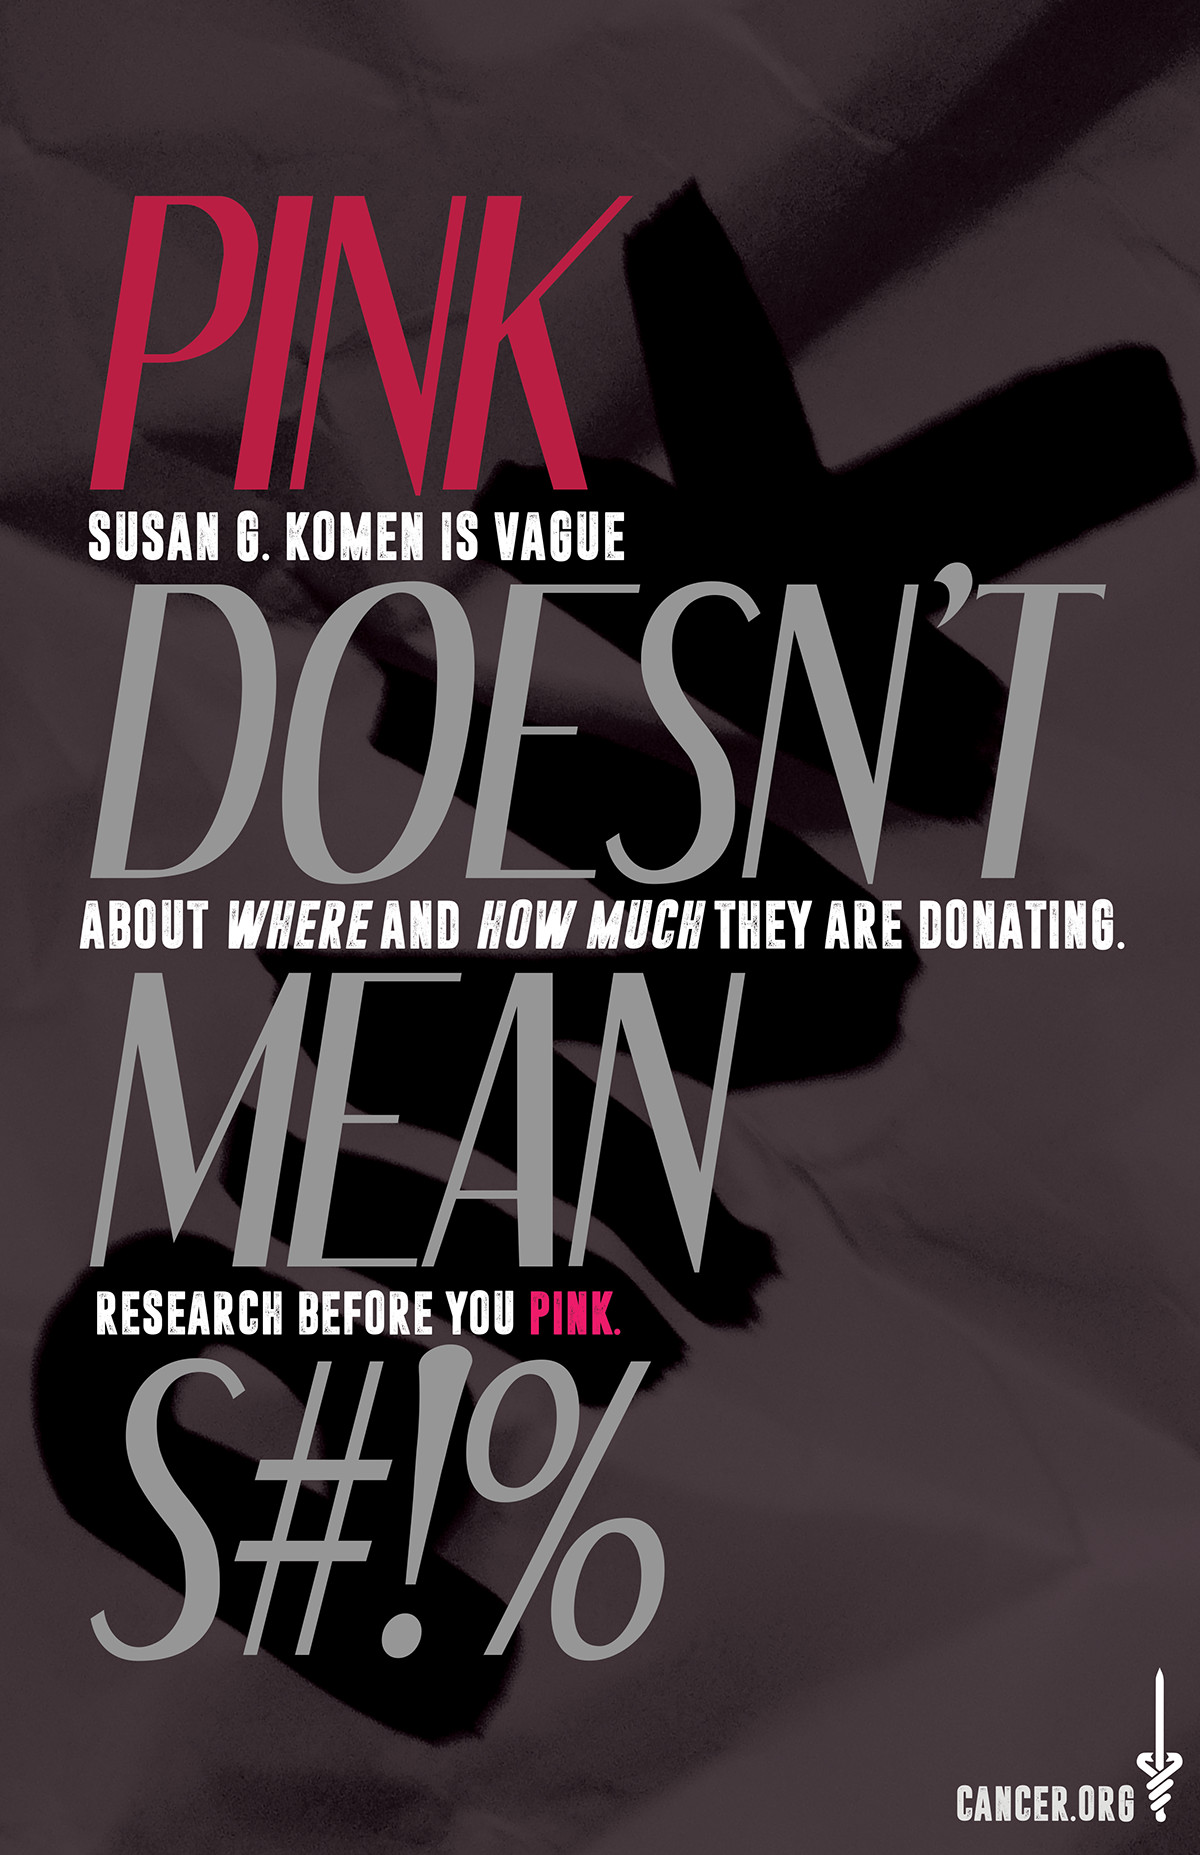 CCAD breast cancer awareness ad campaign American Cancer Society Susan G. Komen for the cure billboard print ad Poster Design Heidi Clifford Adobe Photoshop social awareness breast cancer